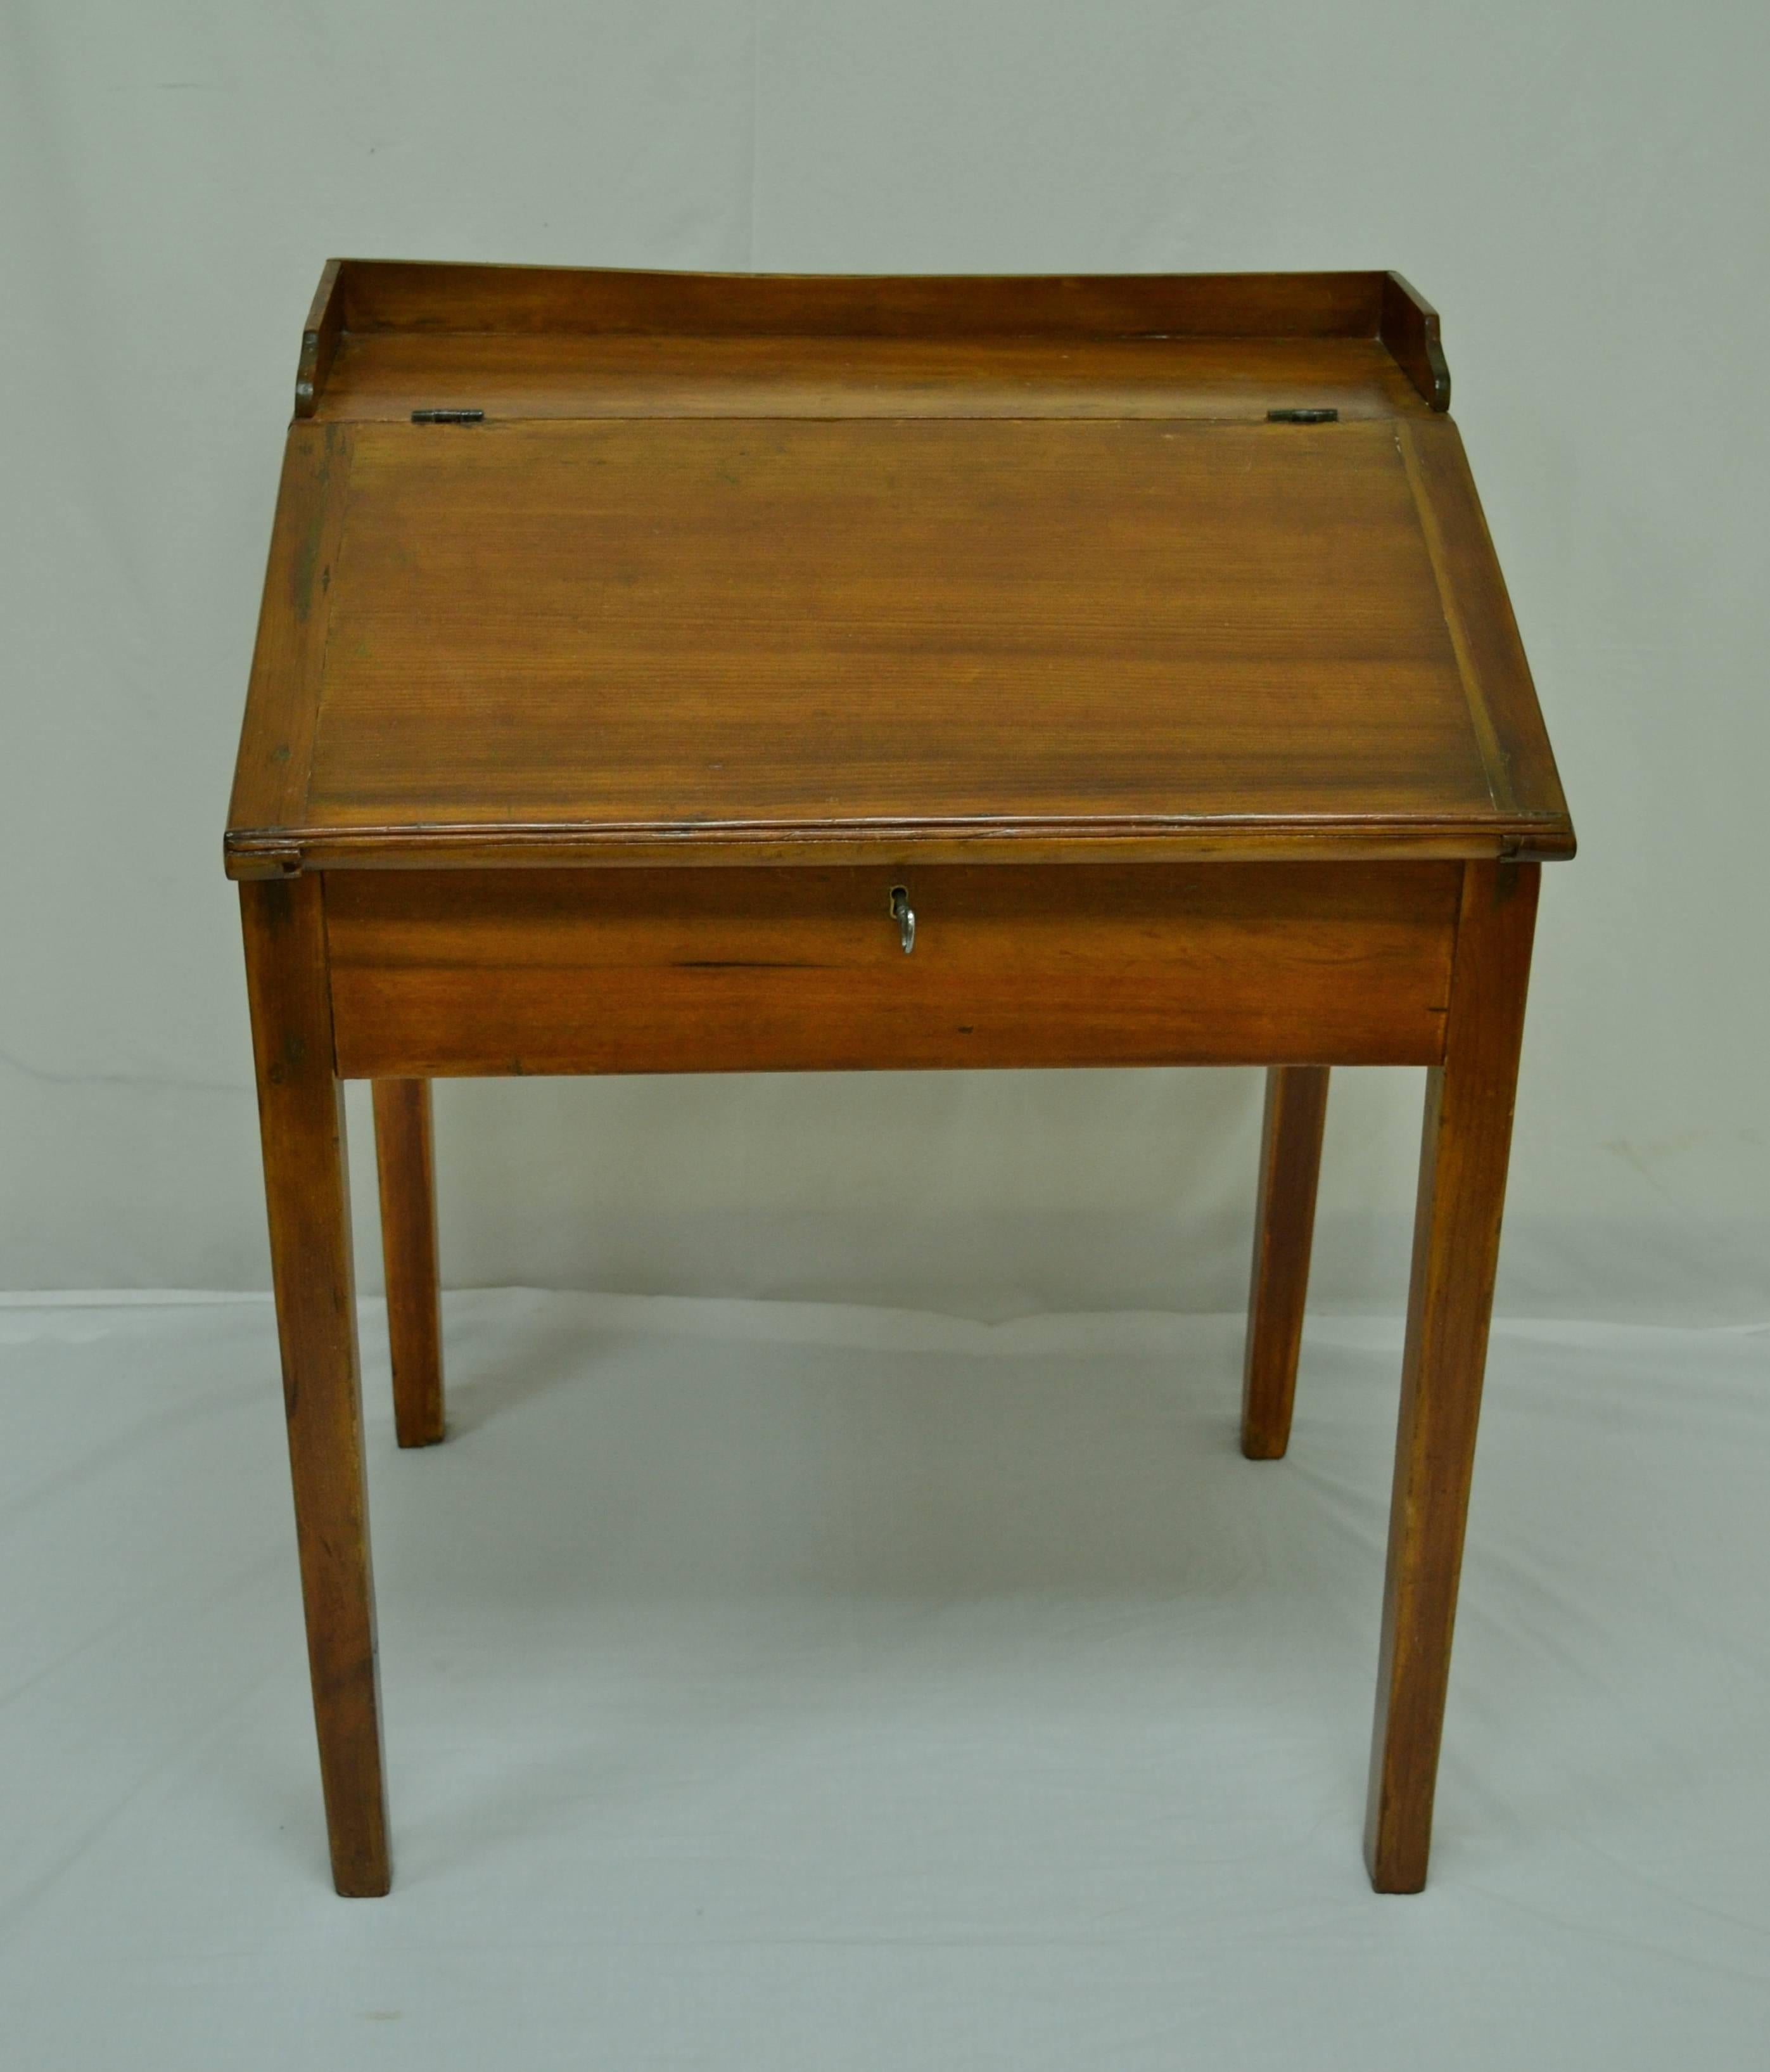 This is a handsome little pine and poplar schoolmaster’s desk on straight tapered legs. Beneath a slightly concave low gallery, the lift-top lid is mounted on original iron hinges. The working lock is period but not original and the key is a new